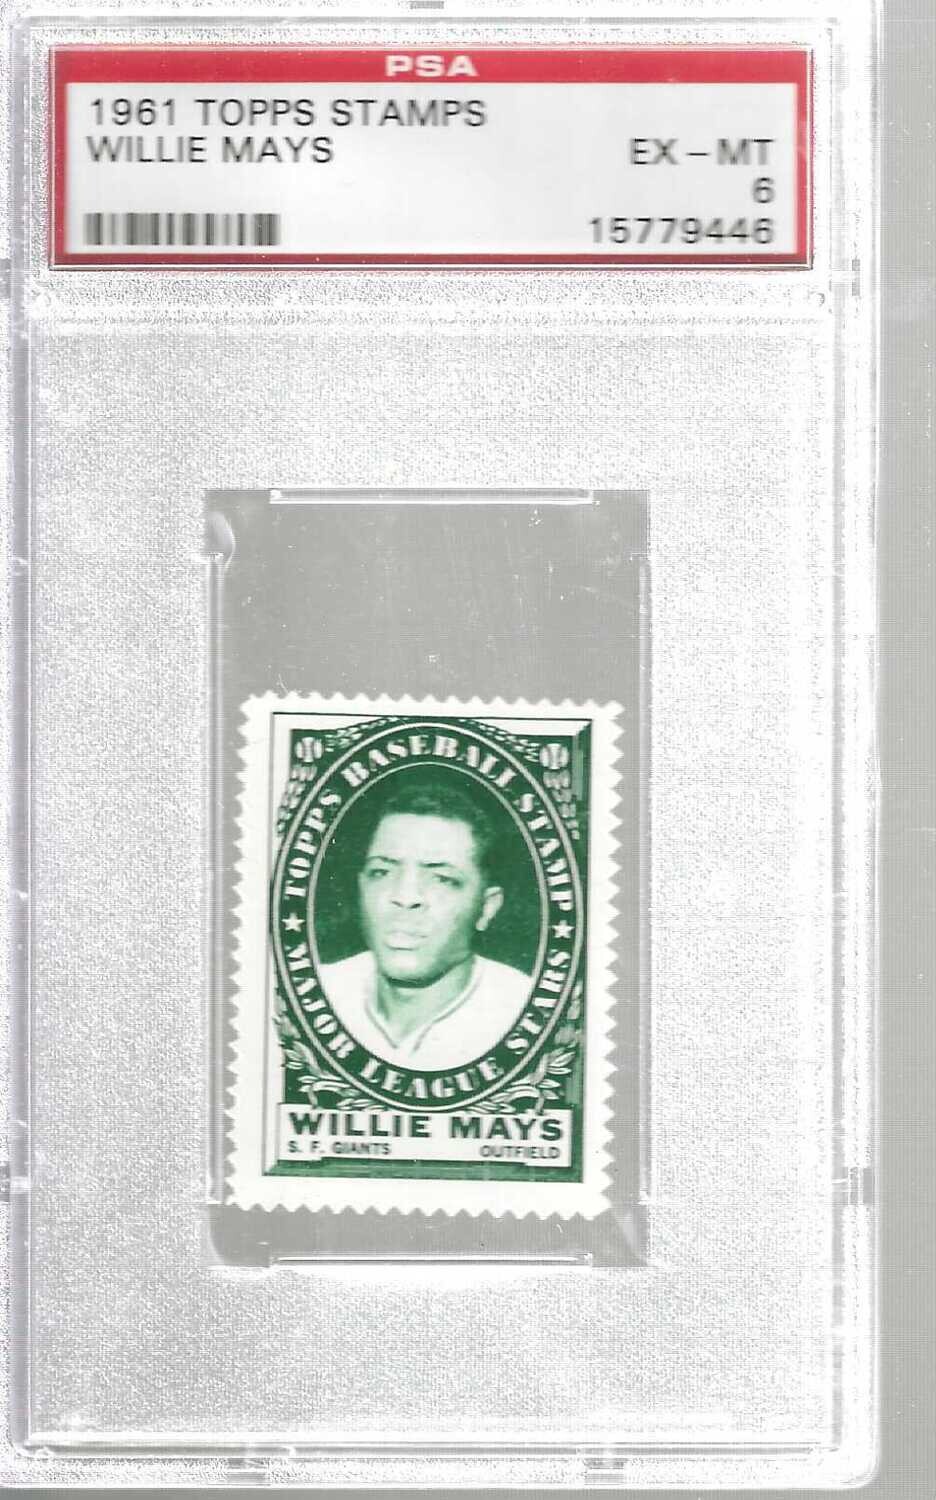 1961 Topps Stamps Willie Mays PSA 6